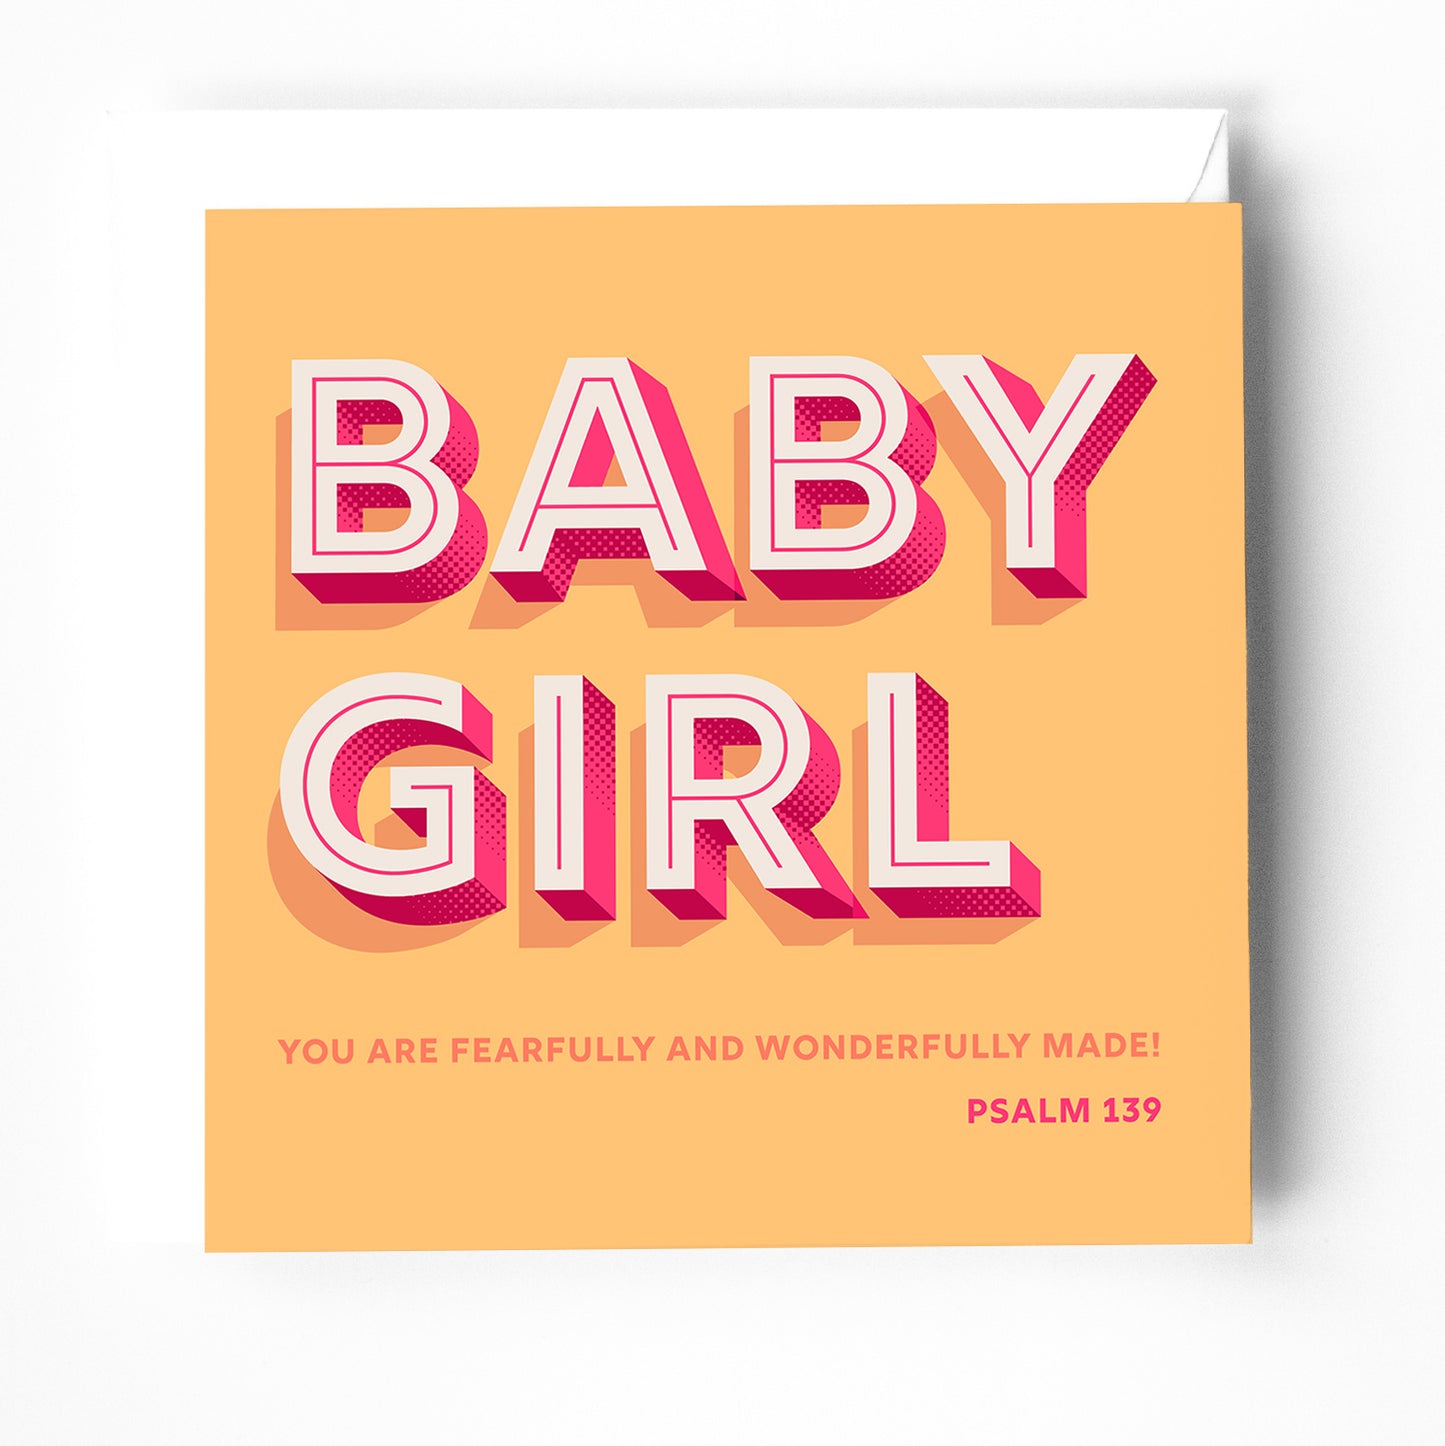 Baby Girl greeting card with bible verse